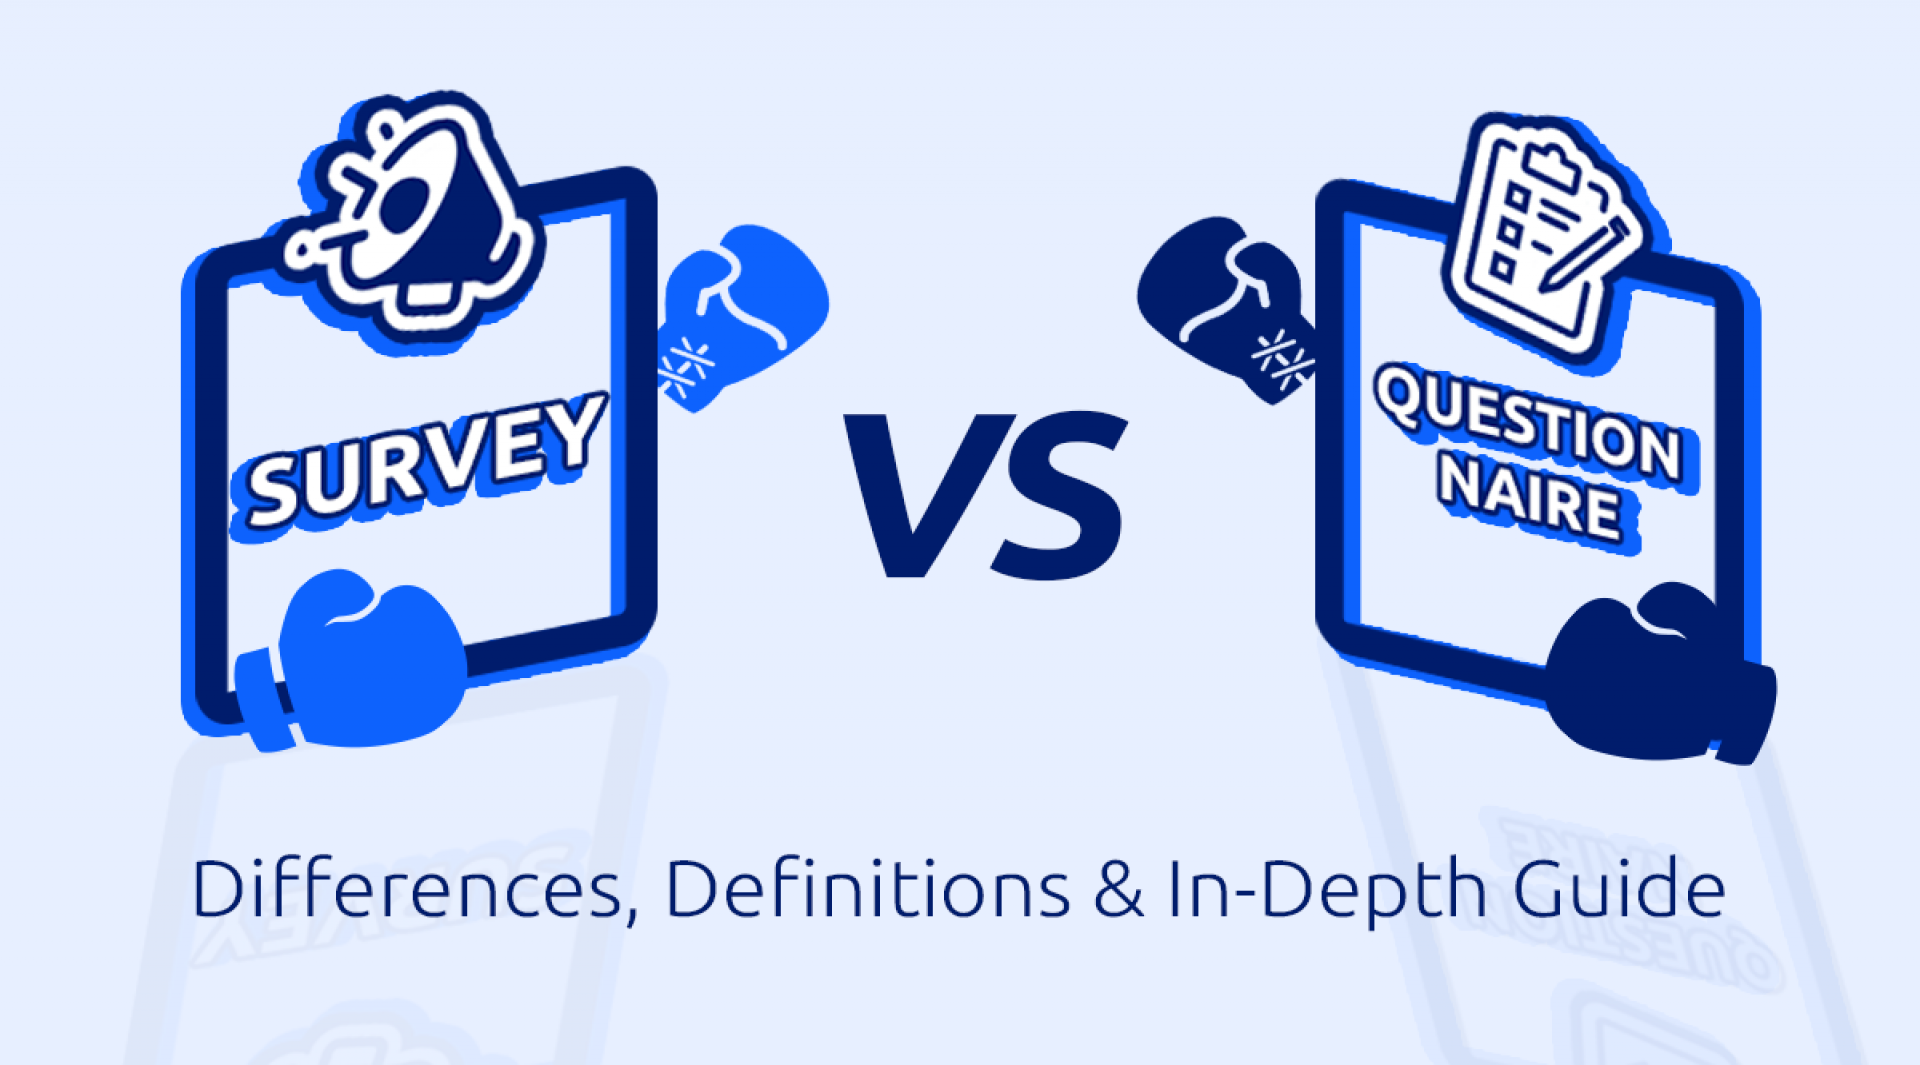 Survey vs Questionnaire: Differences, Definitions & In-Depth Guide